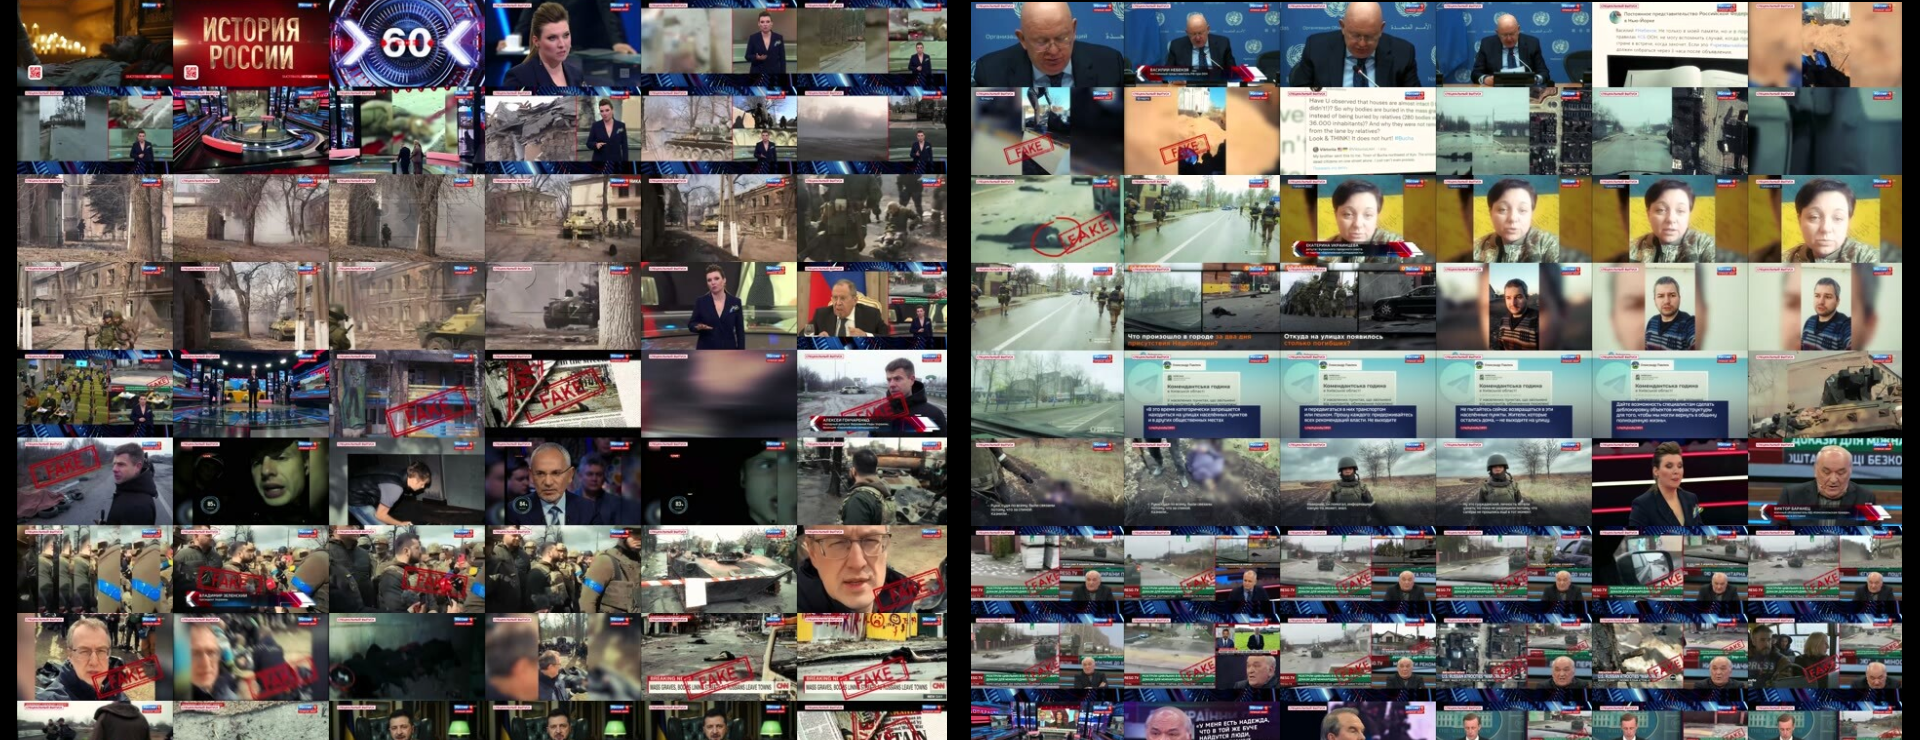 LMMs & Google's Gemini 1.5 Pro Watching Television News: Using Image Surrogates To Summarize A Russian TV News Clip Into Stories